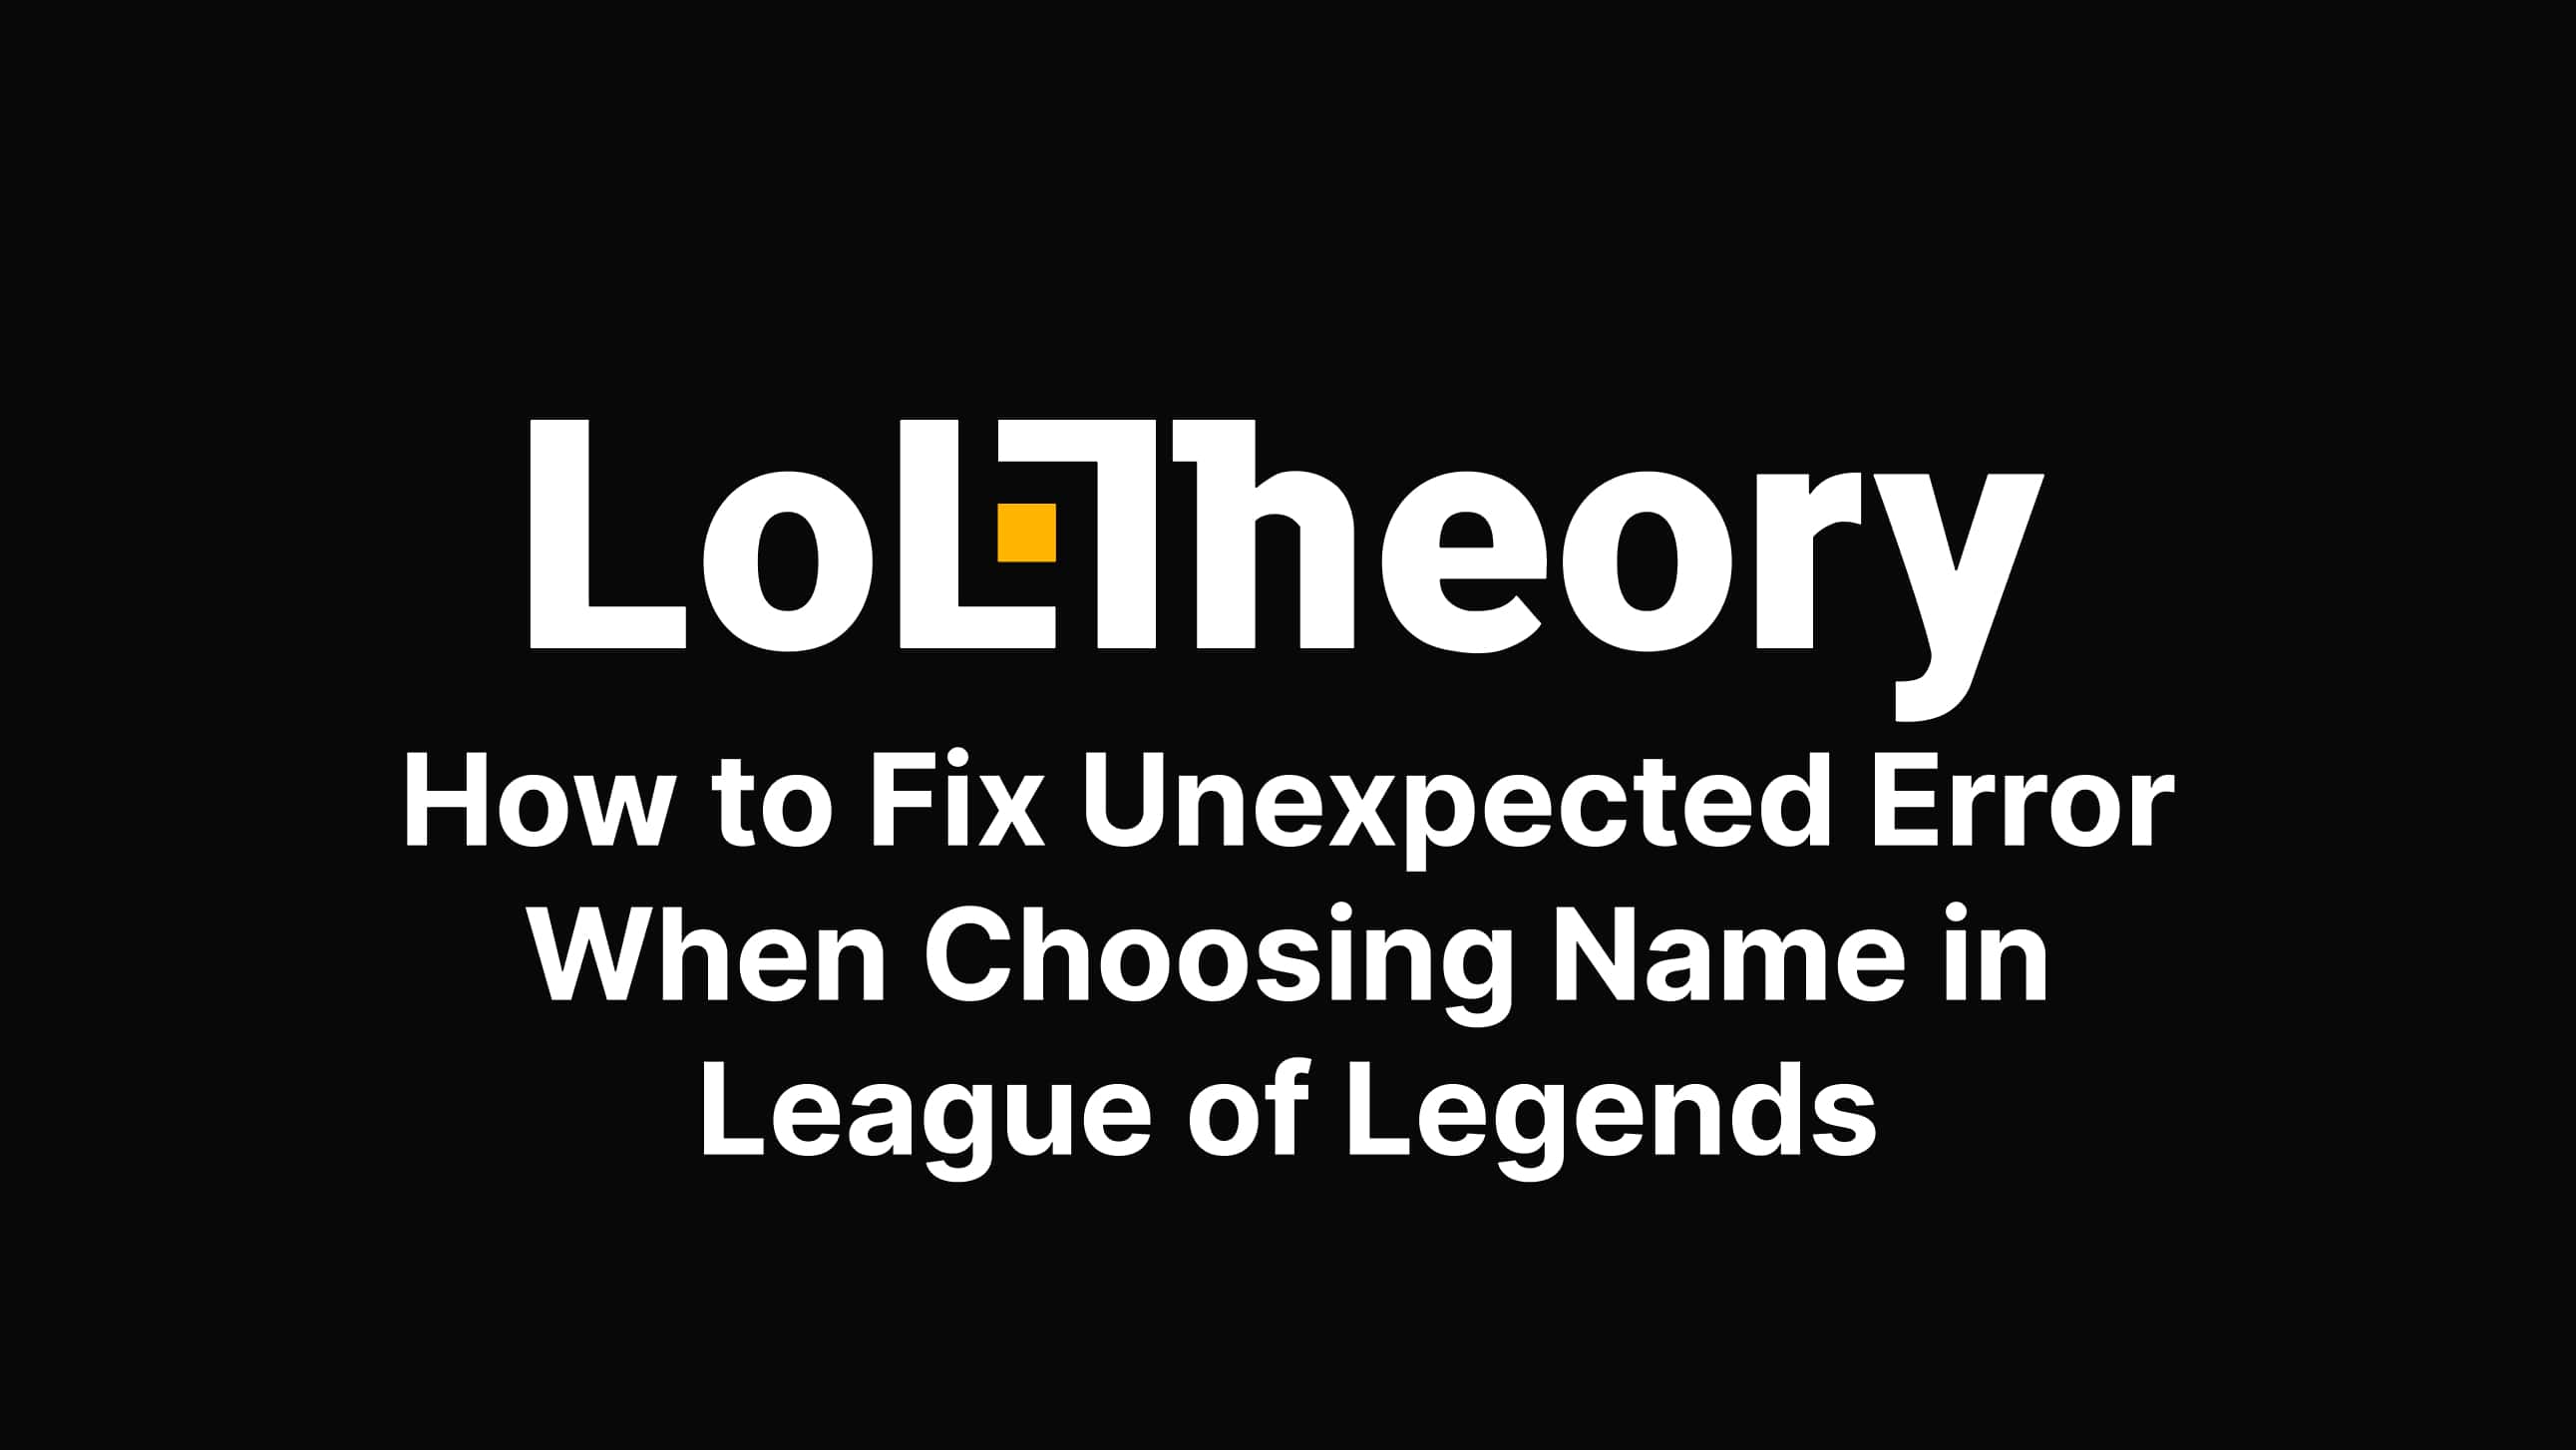 FIX] Unexpected Error With Login Session in League of Legends